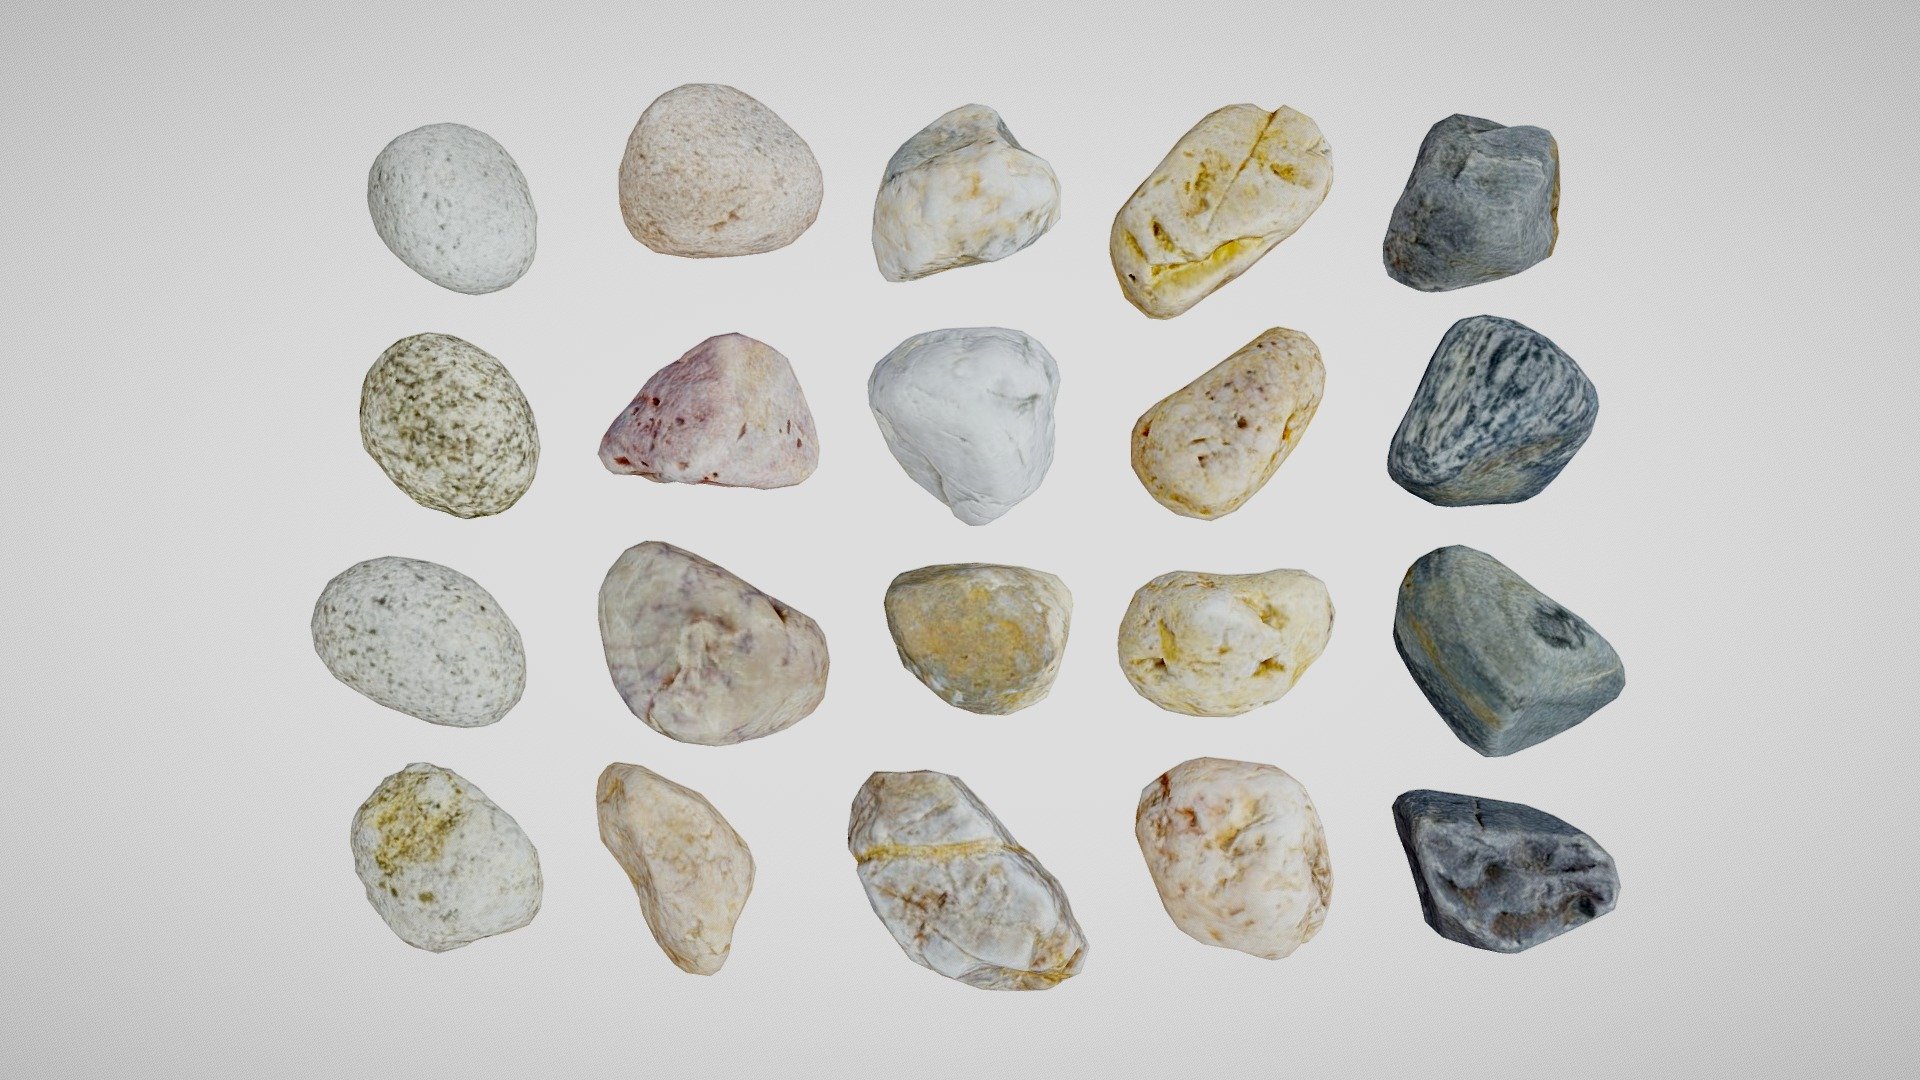 These assets were generated from scans of various beach pebbles and stones I picked up on the shore in Moguériec, in France.

Each prop in this collection is made of 400 triangles, and comes with 256px albedo and normal maps. 

Feel free to check them on the store here if you ever need more LODs: they come with 6 different Levels Of Detail (from 400 triangles and 256px textures up to 250k triangles and 4096x4096 textures).

Otherwise, I've previously scanned and/or curated other free packs of lowpoly assets in this collection, do not hesitate to have a look!

I'd love to know if you create something cool out of those assets ! - Lowpoly Rocks - Free Download - Download Free 3D model by Loïc Norgeot (@norgeotloic) 3d model